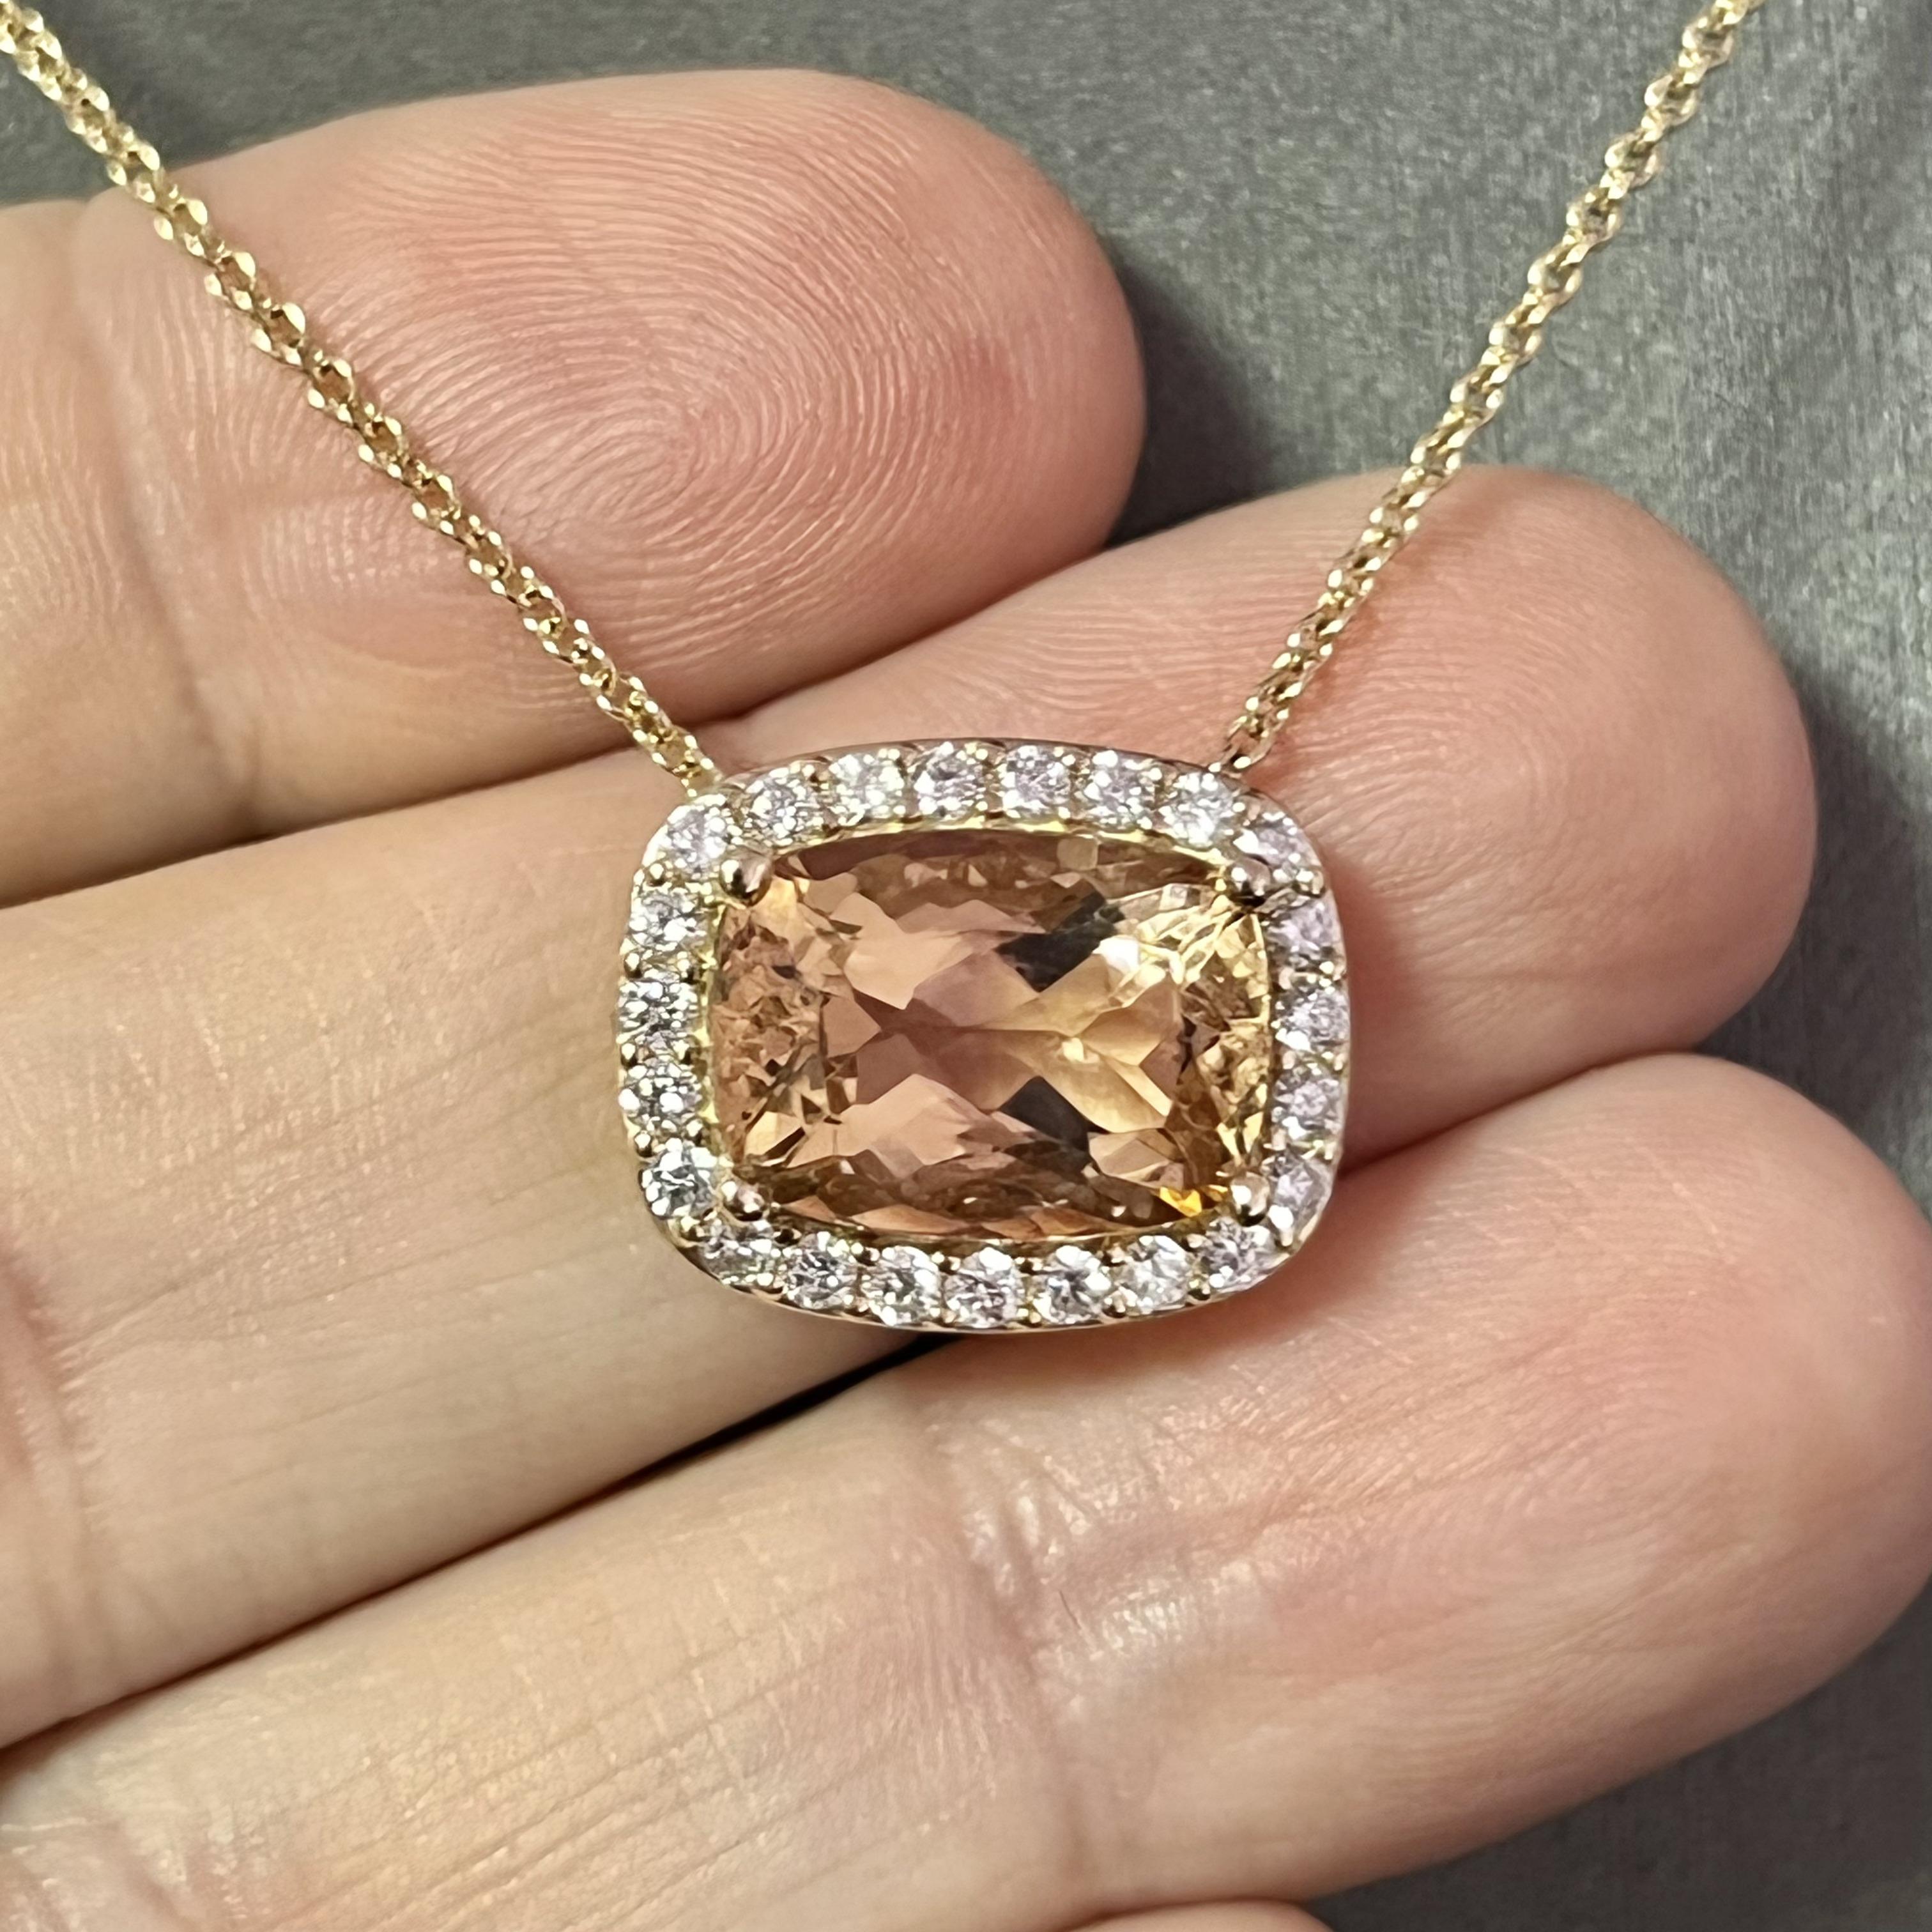 Diamond Morganite Pendant Necklace 14k Gold 7.35 TCW Certified For Sale 6